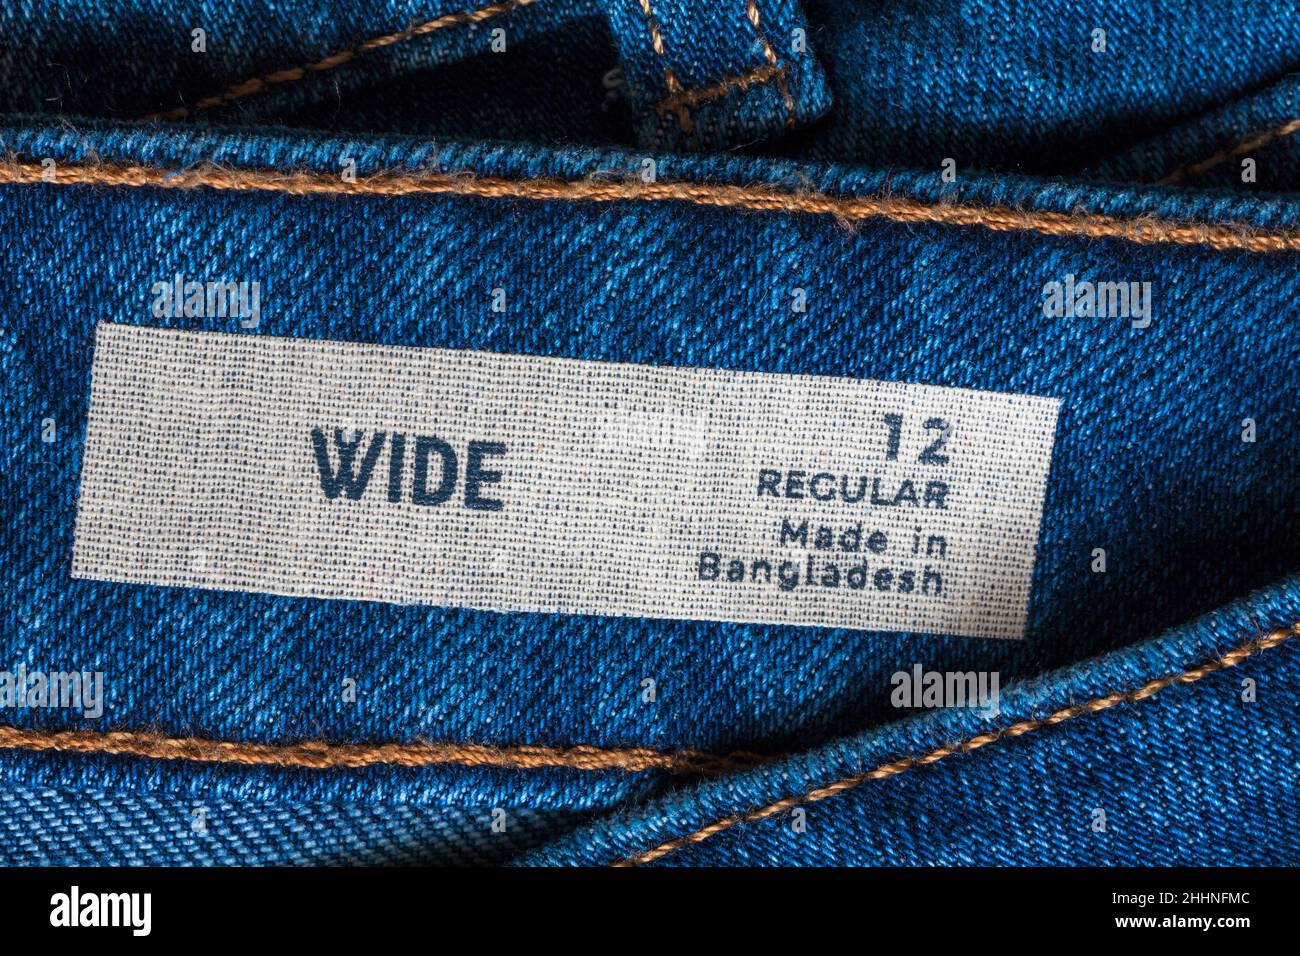 Wide Made in Bangladesh label in regular size 12 M&S denim jeans - sold ...